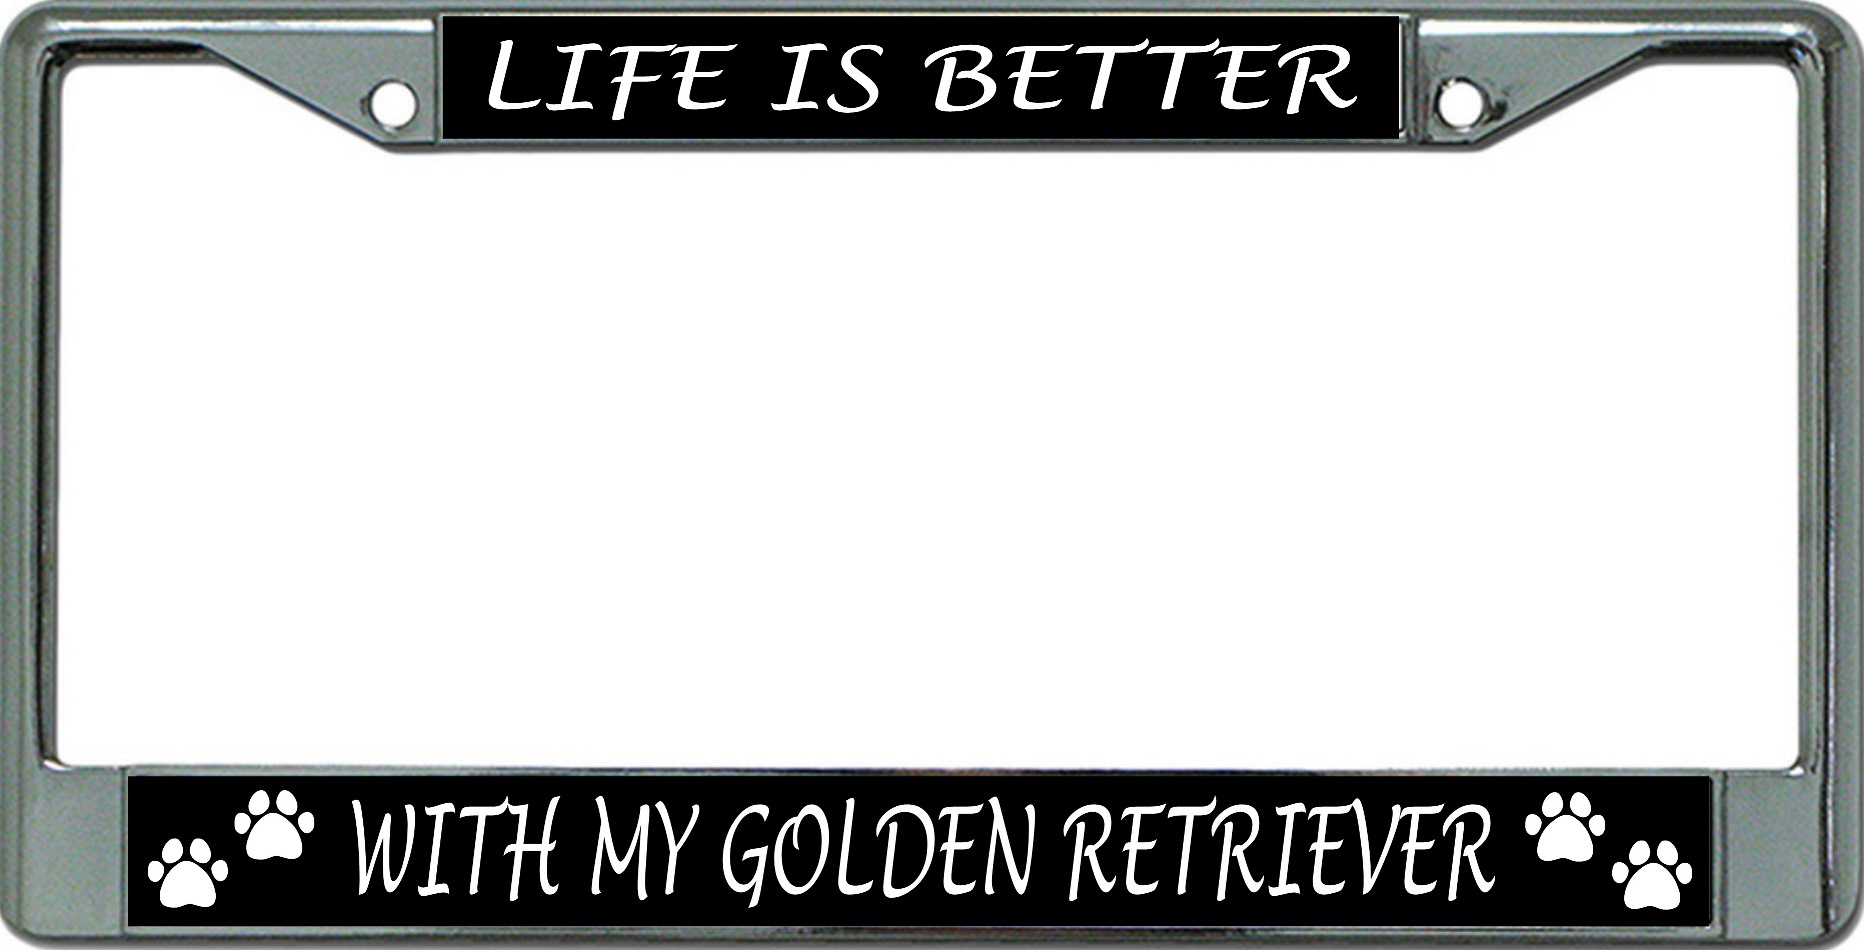 Life Is Better With My Golden Retriever Chrome License Plate FRAME